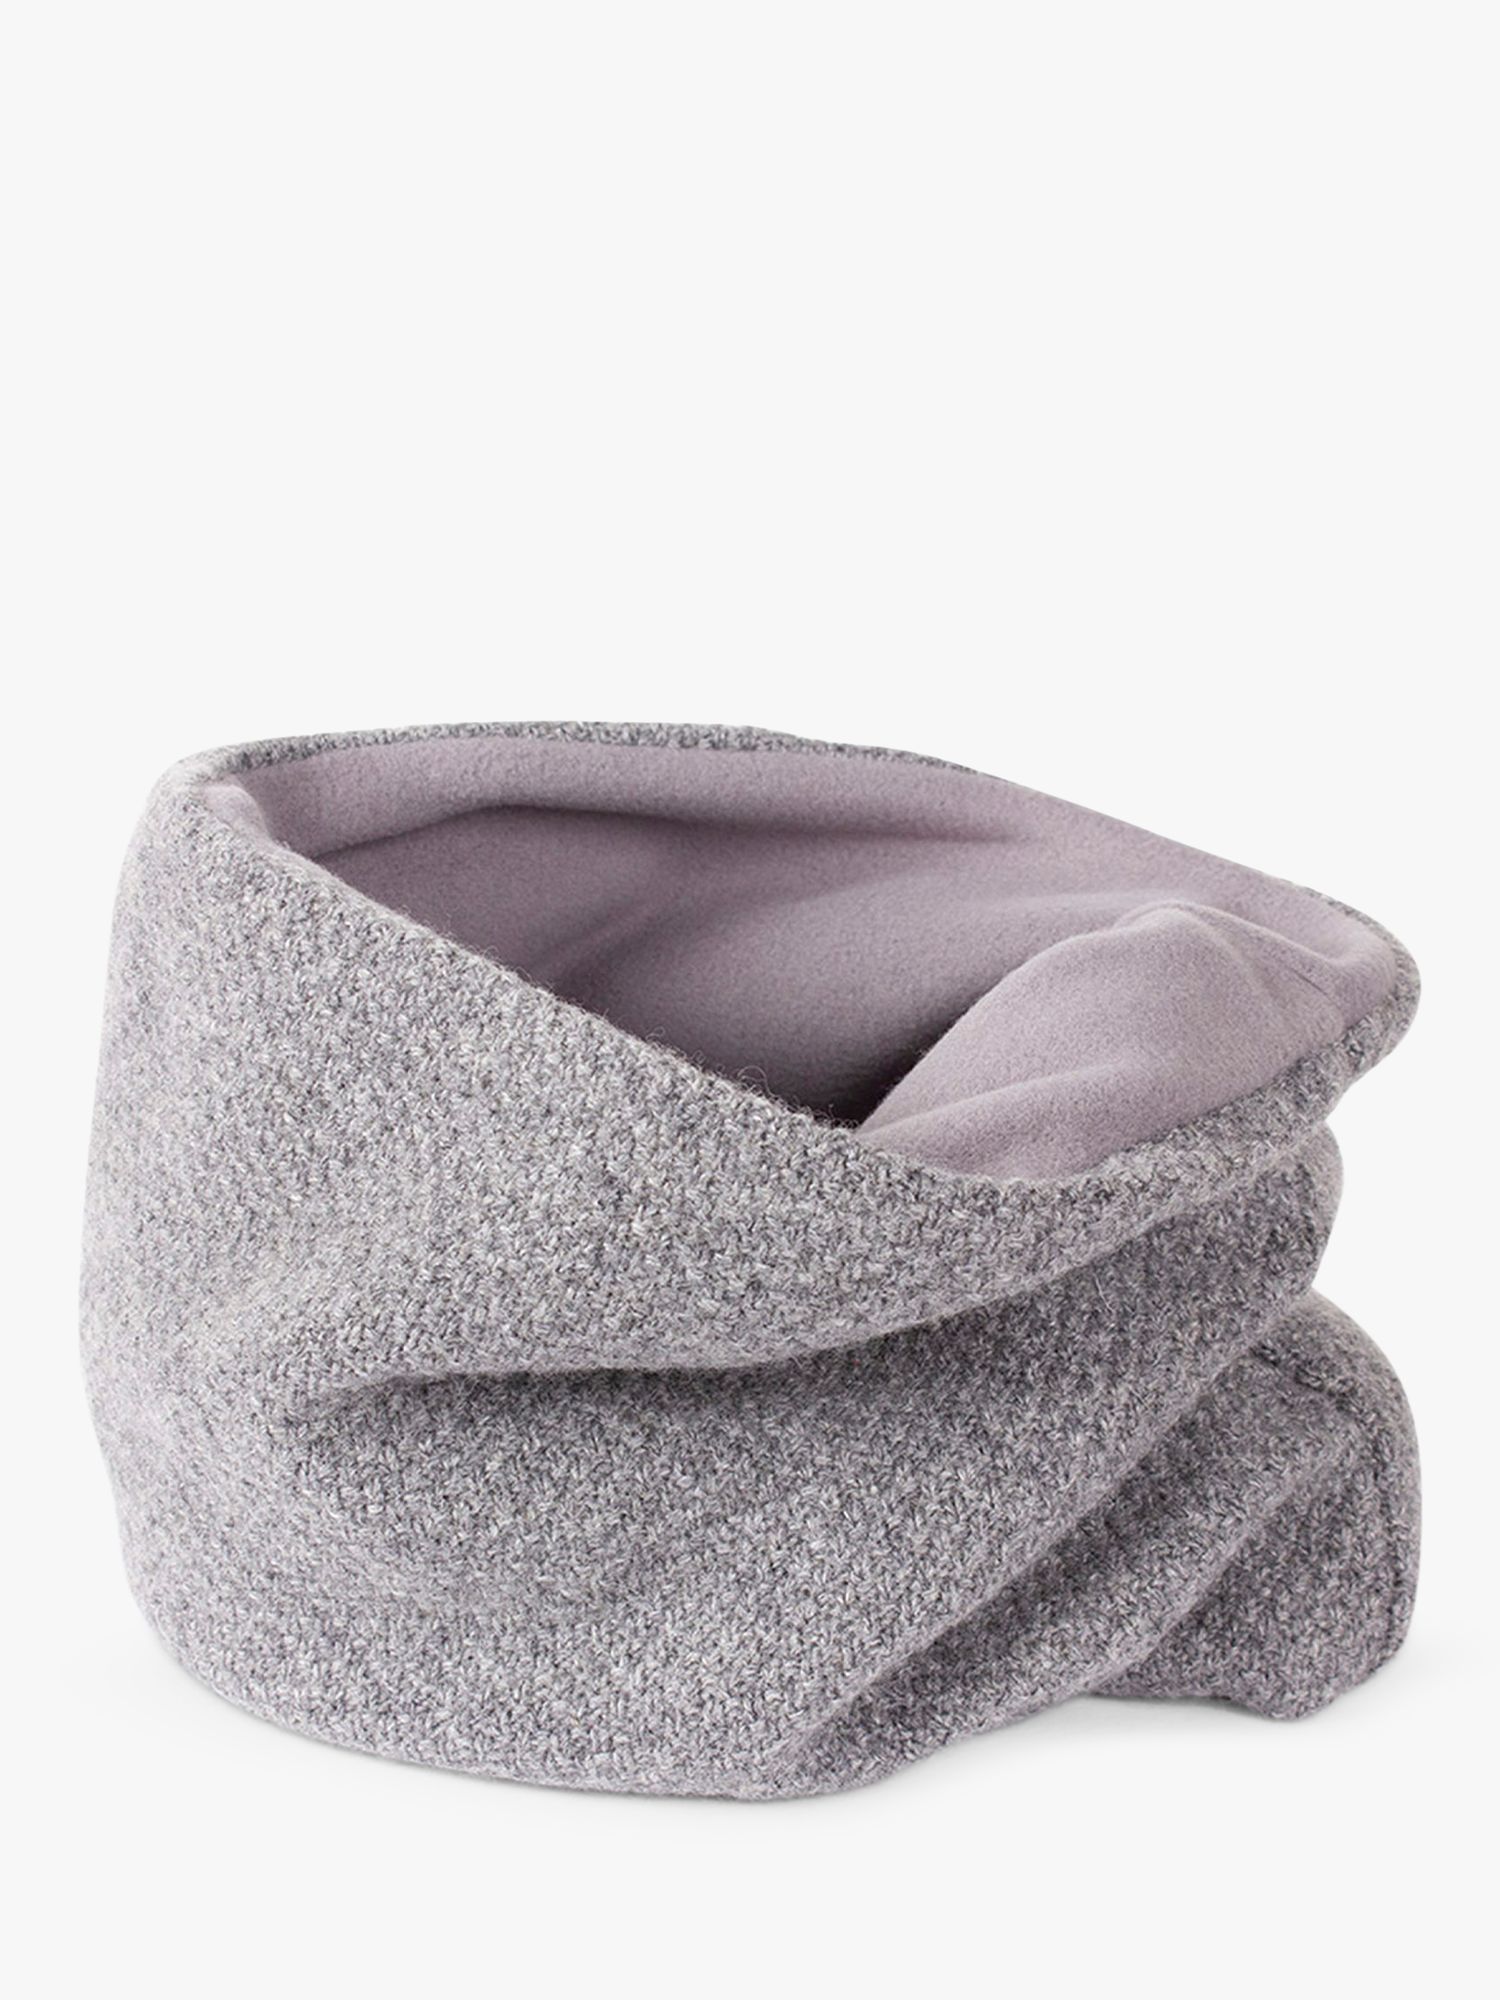 Buy Trotters Kids' Rice Stitch Wool/Cashmere Blend Snoody Online at johnlewis.com